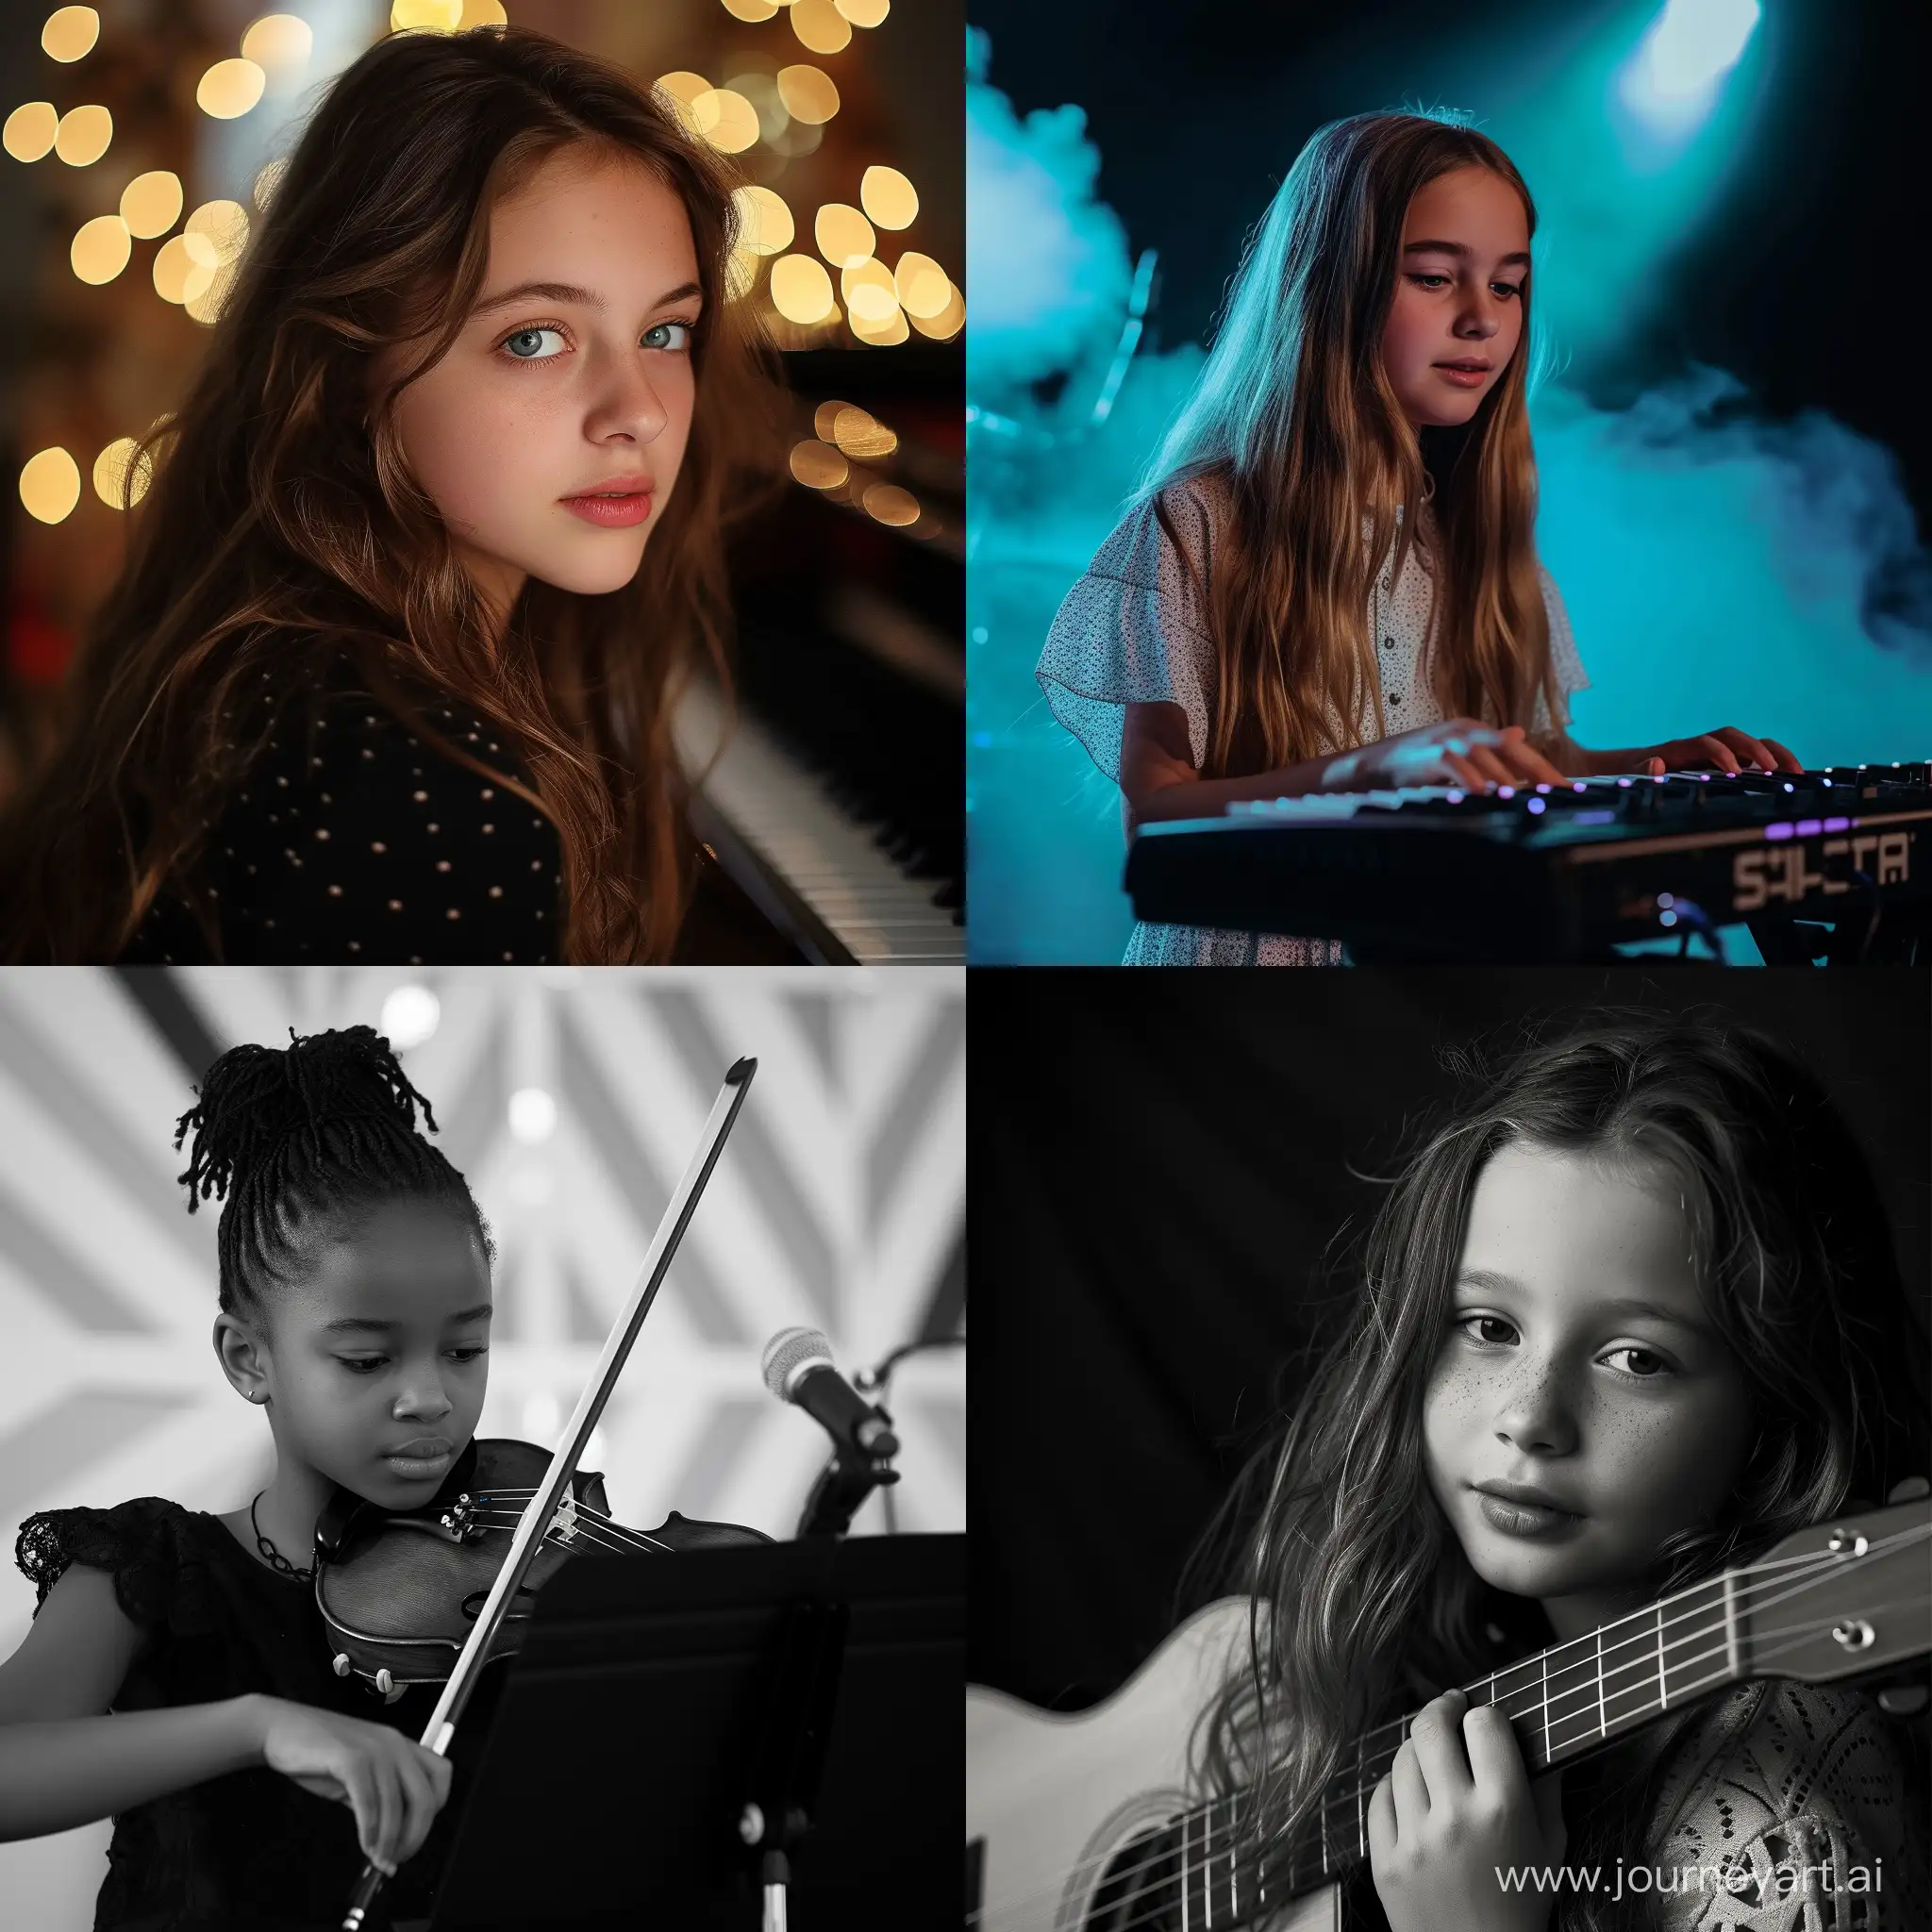 Capturing-Vibrant-Young-Musical-Talents-in-Photography